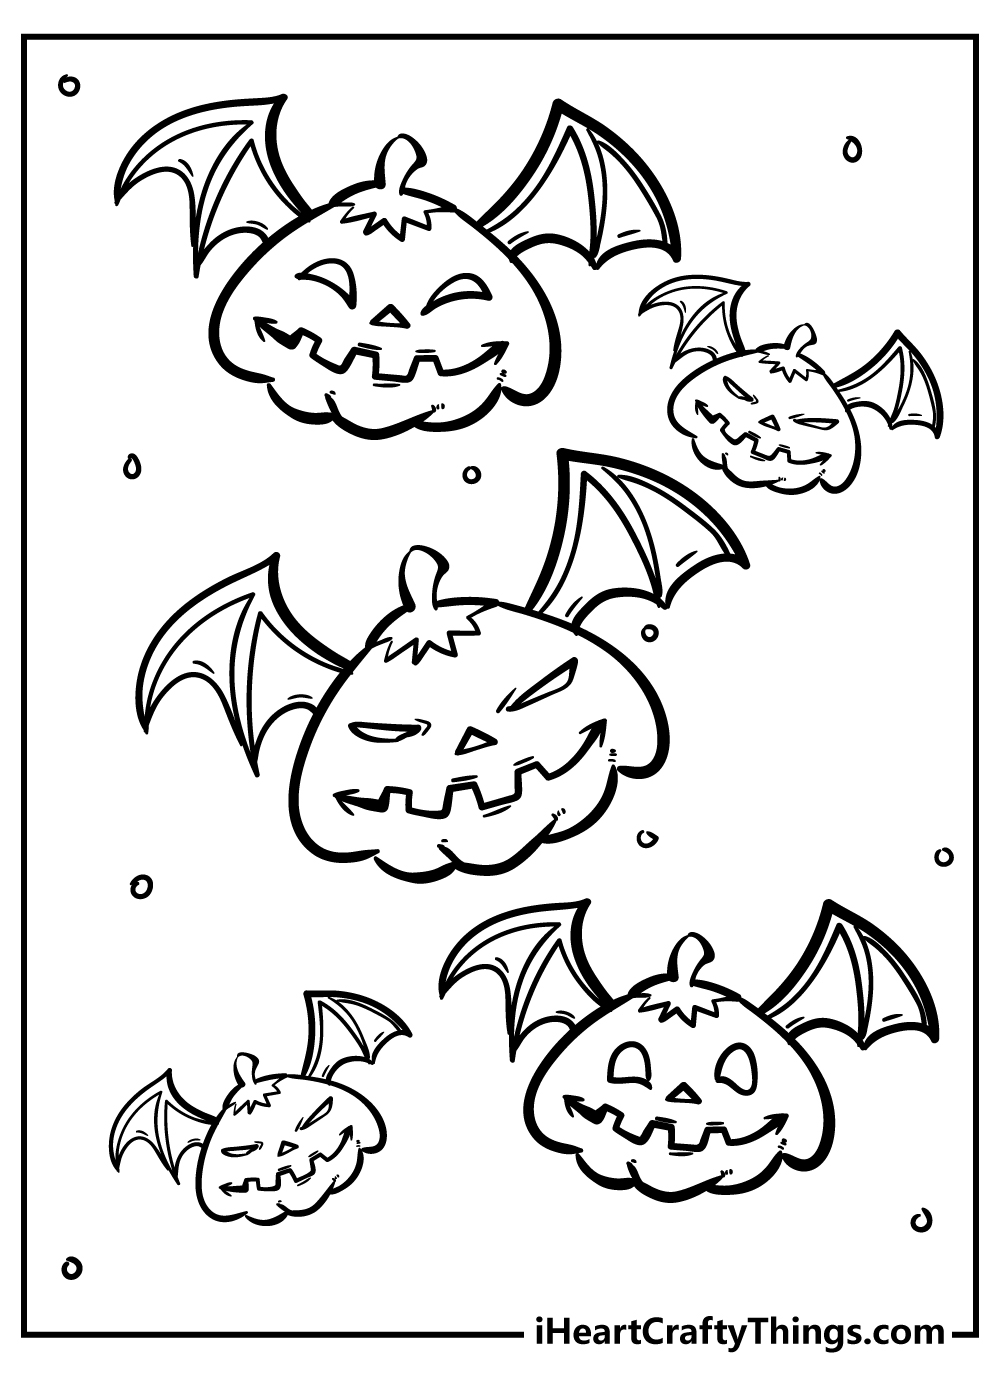 Spooky Coloring Original Sheet for children free download